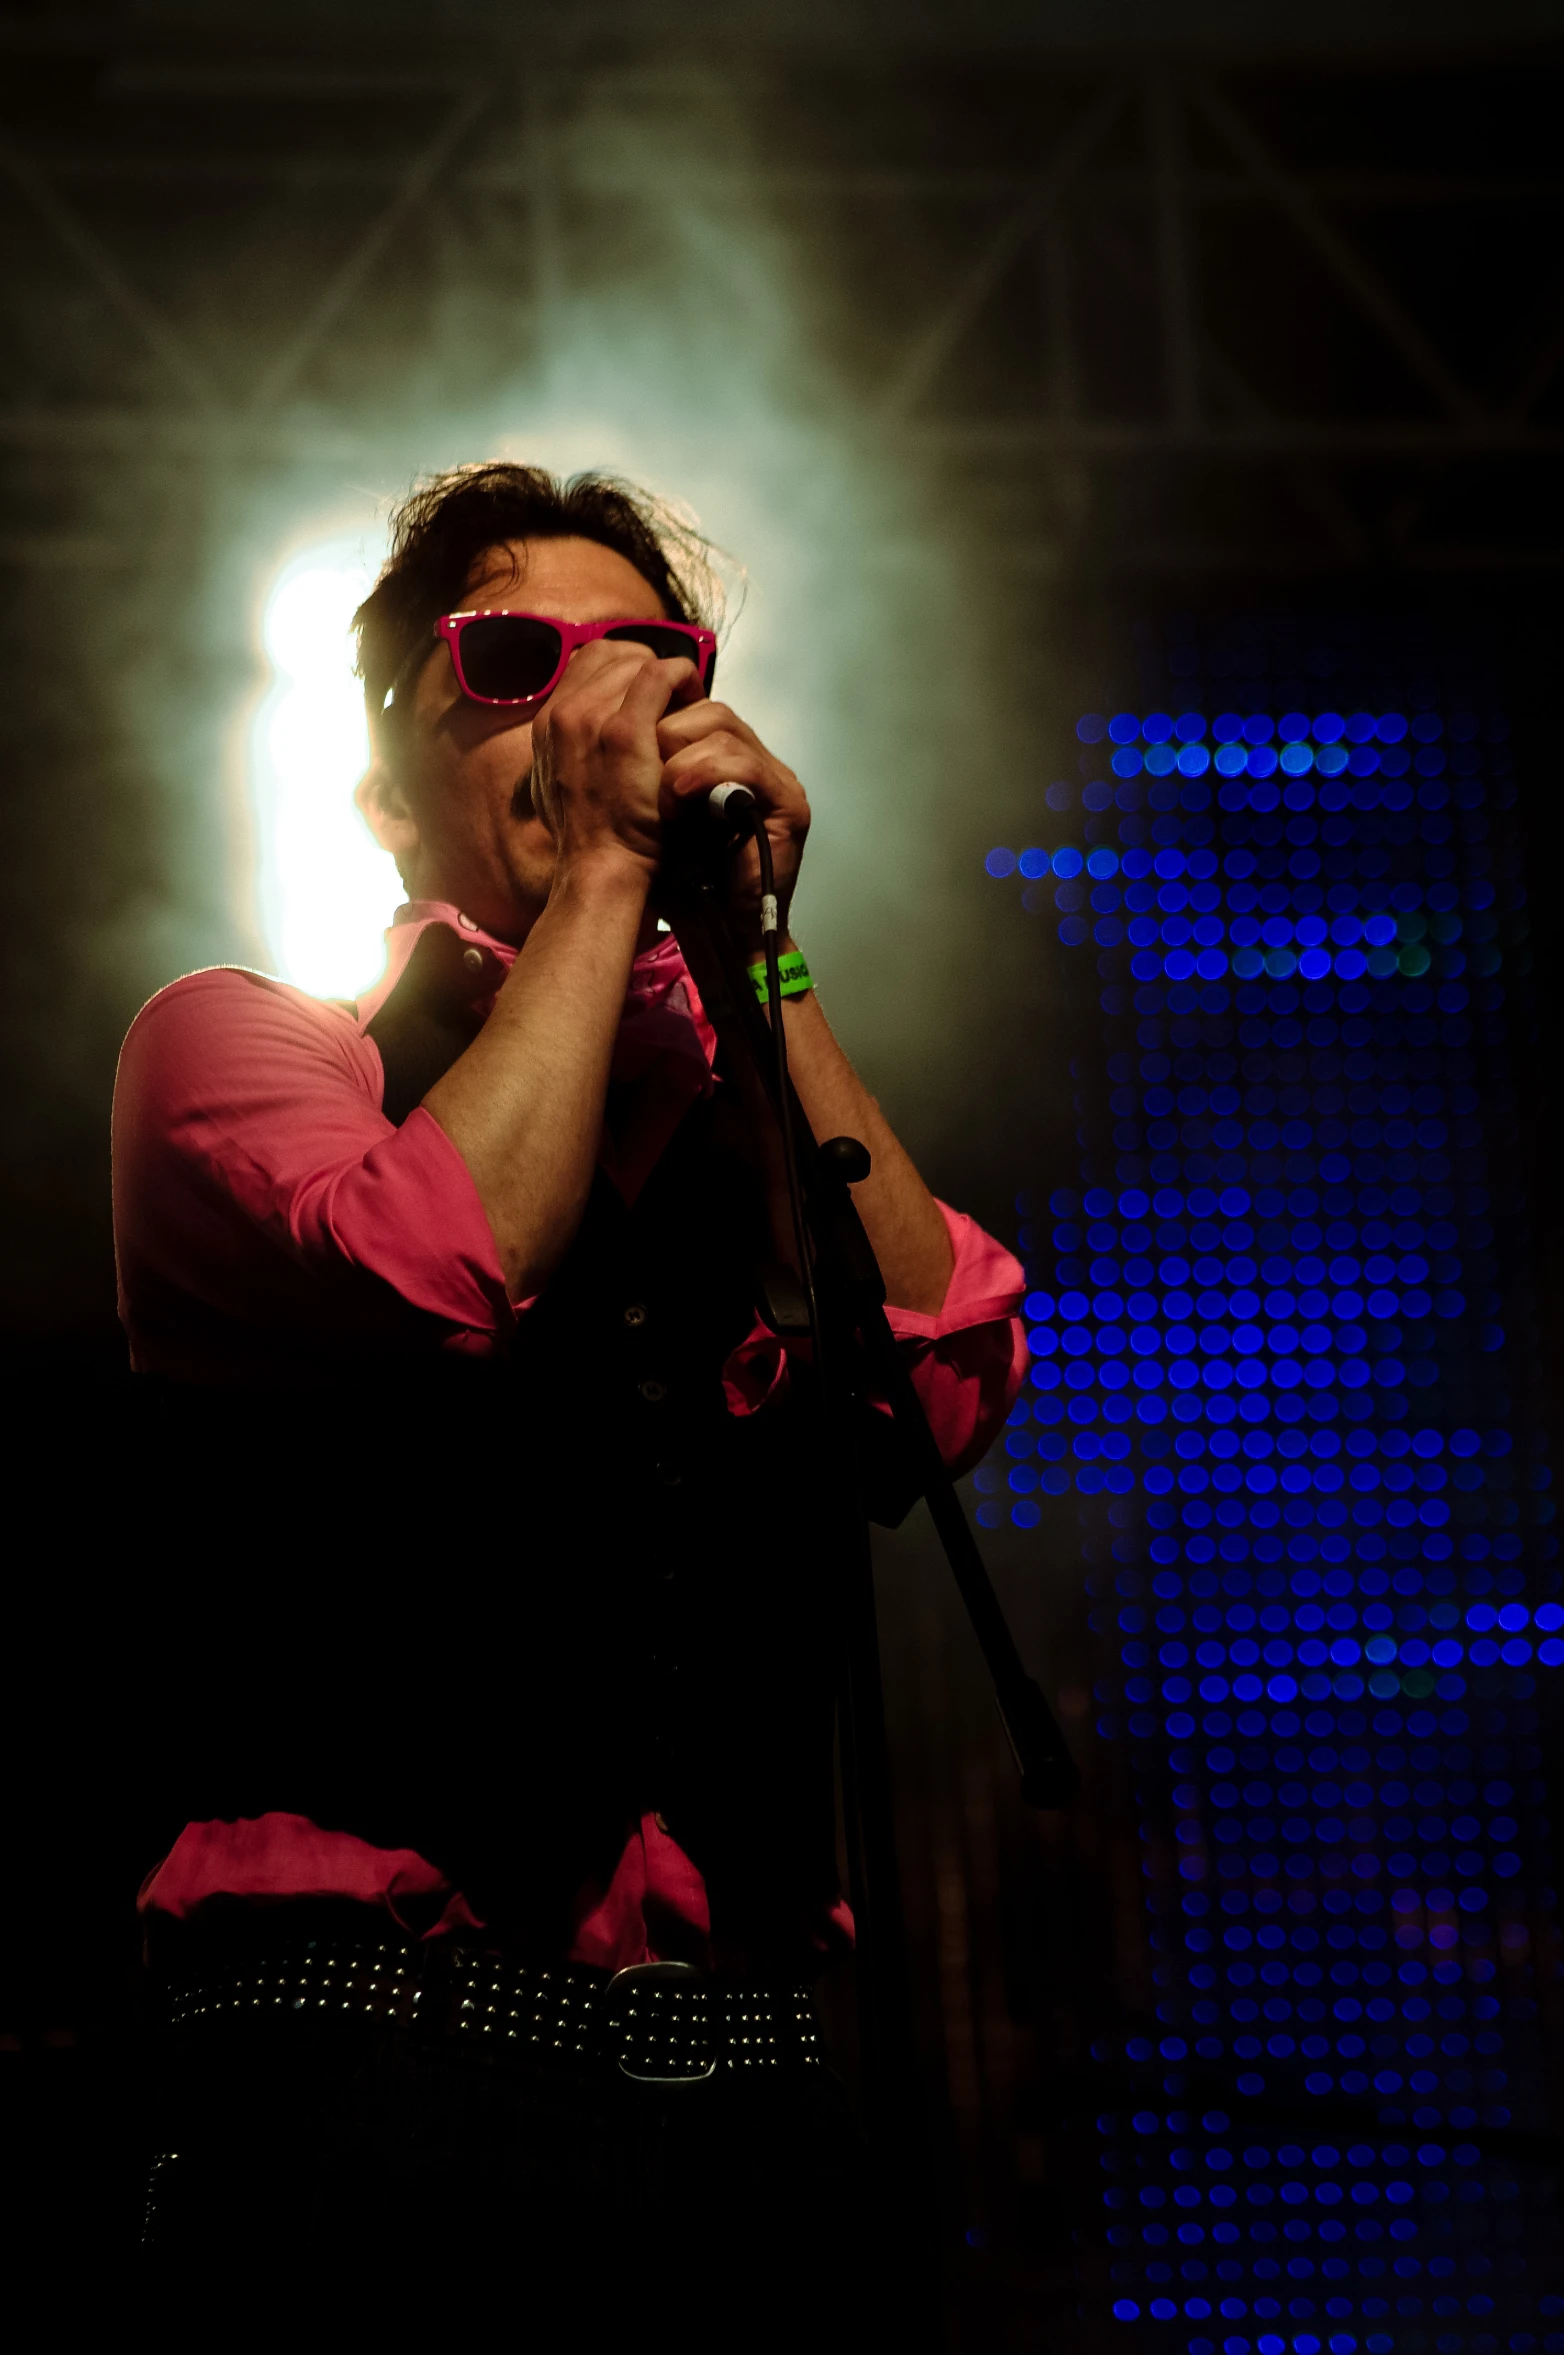 a man wearing sunglasses is singing on stage